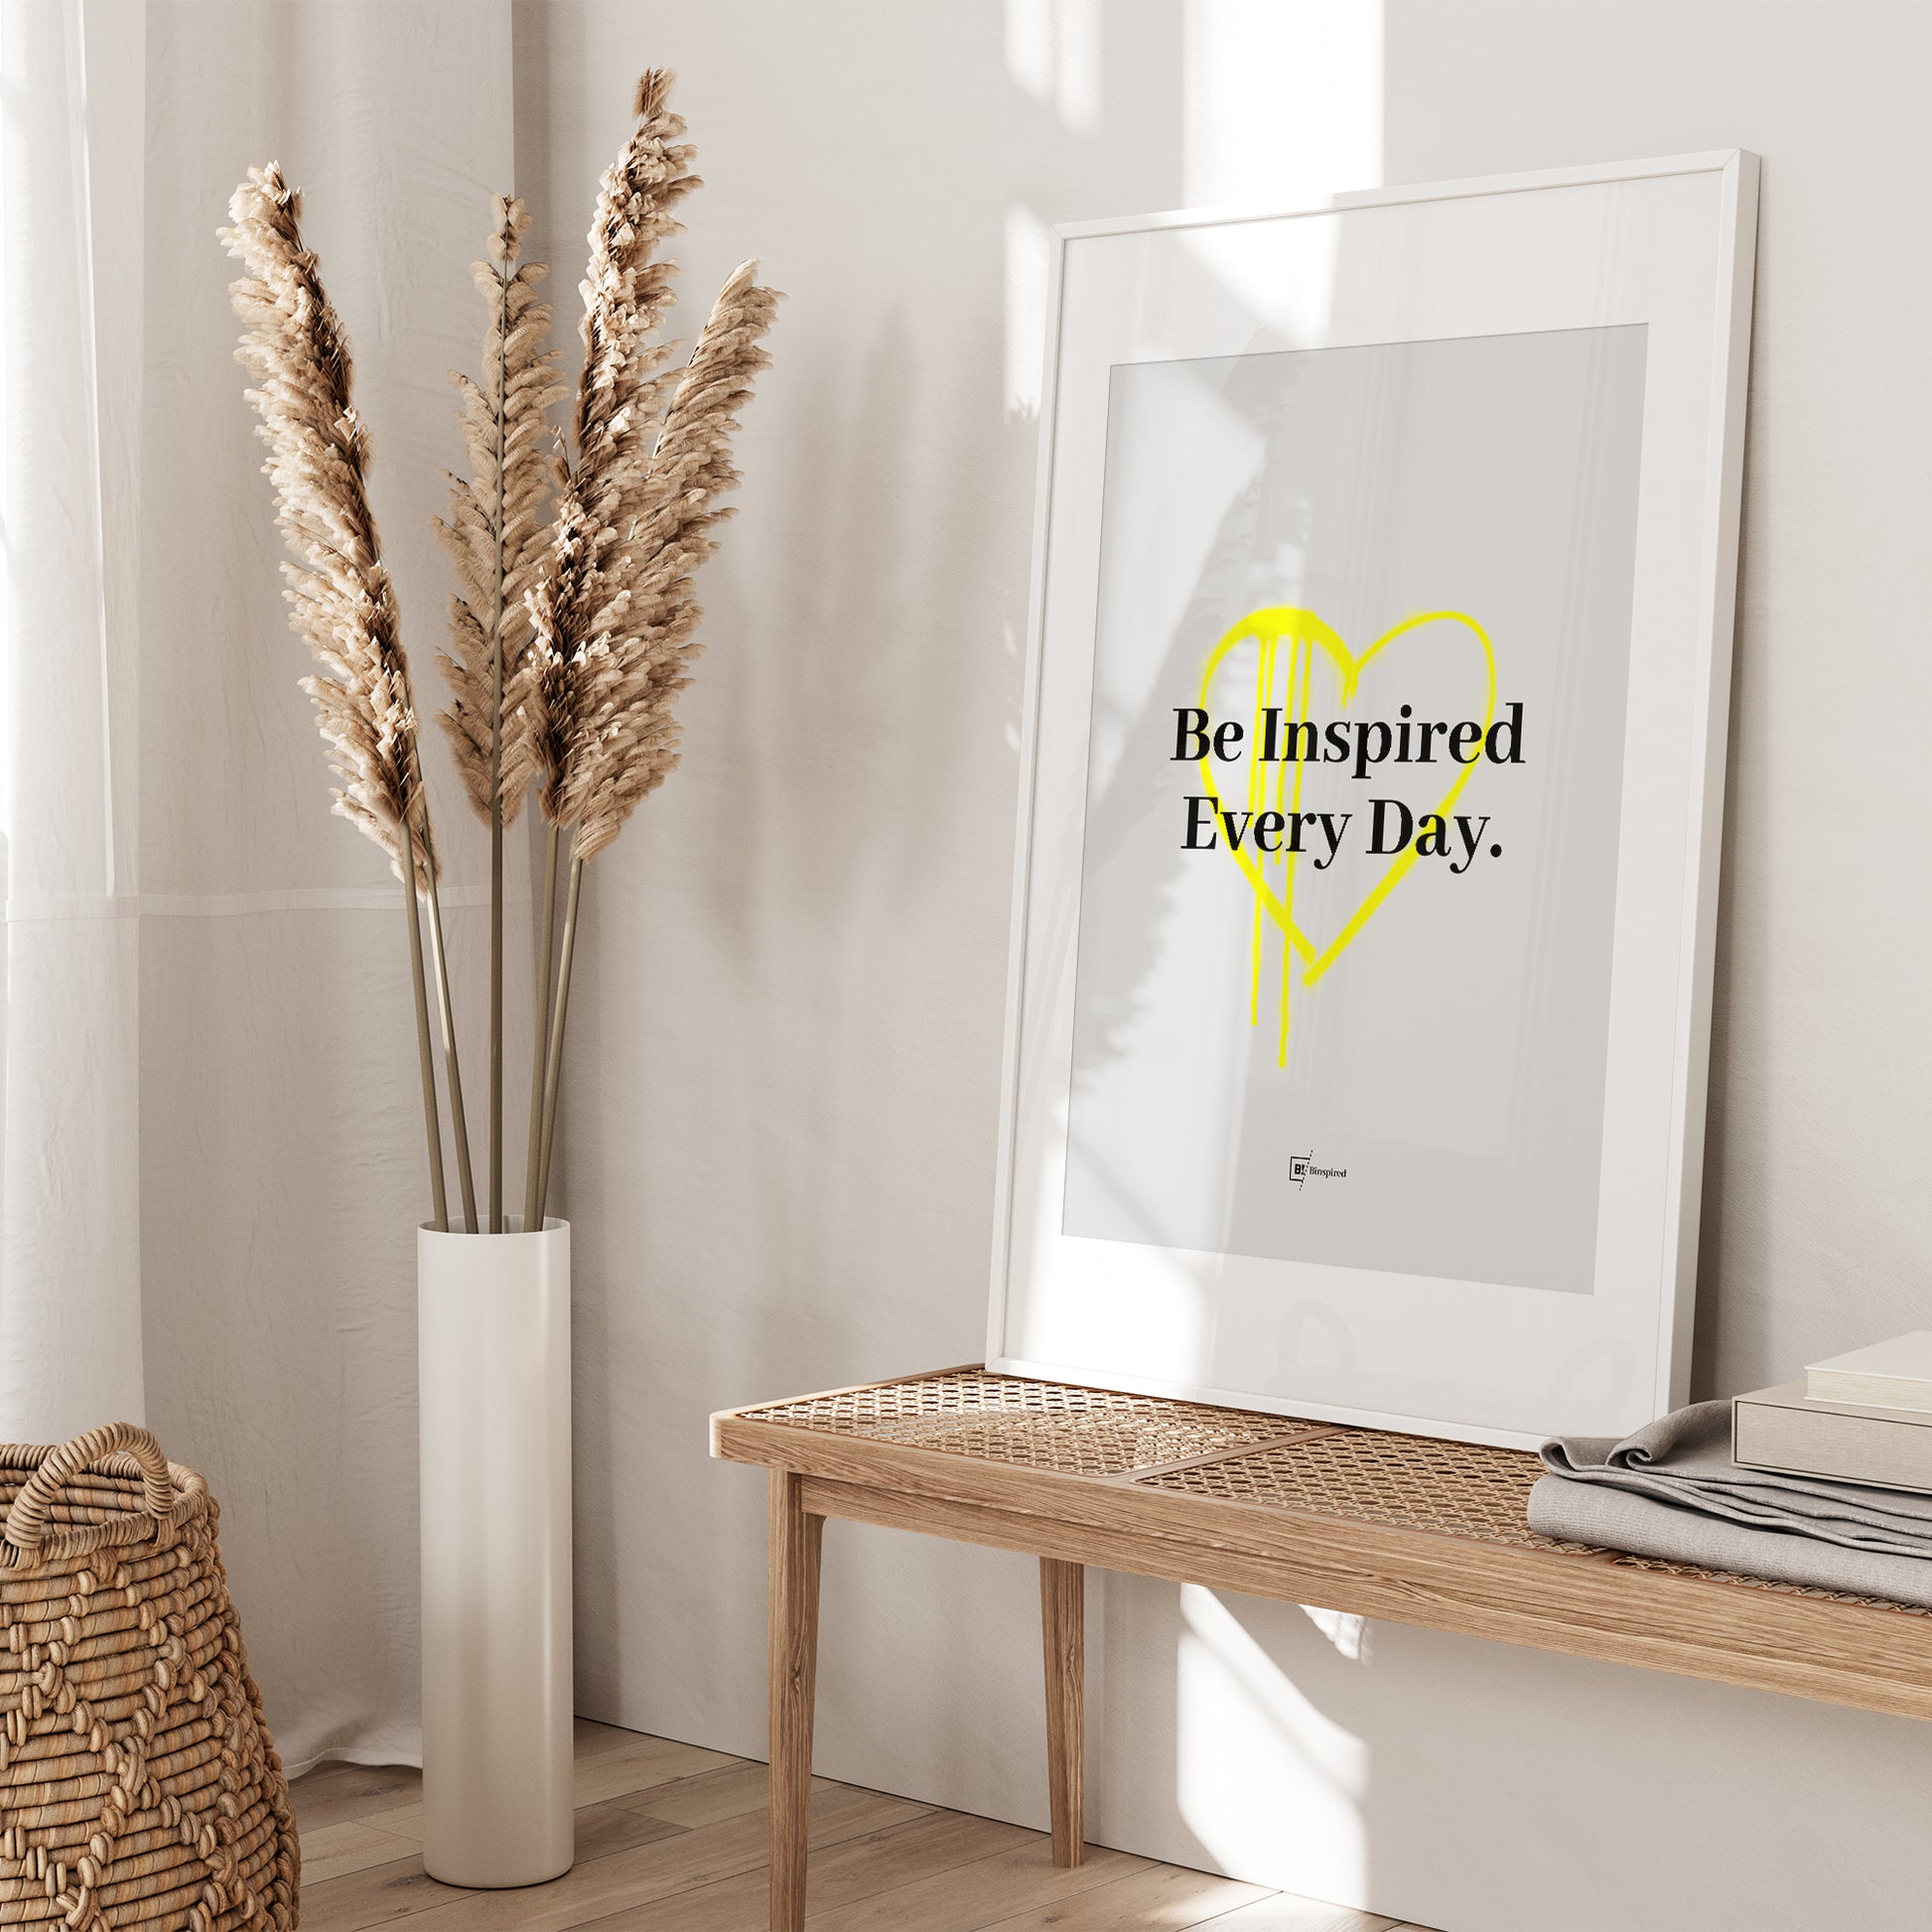 Be inspired by our "Be Inspired Every Day" quote art print! This artwork was printed using the giclée process on archival acid-free paper and is presented in a white frame with passe-partout that captures its timeless beauty in every detail.